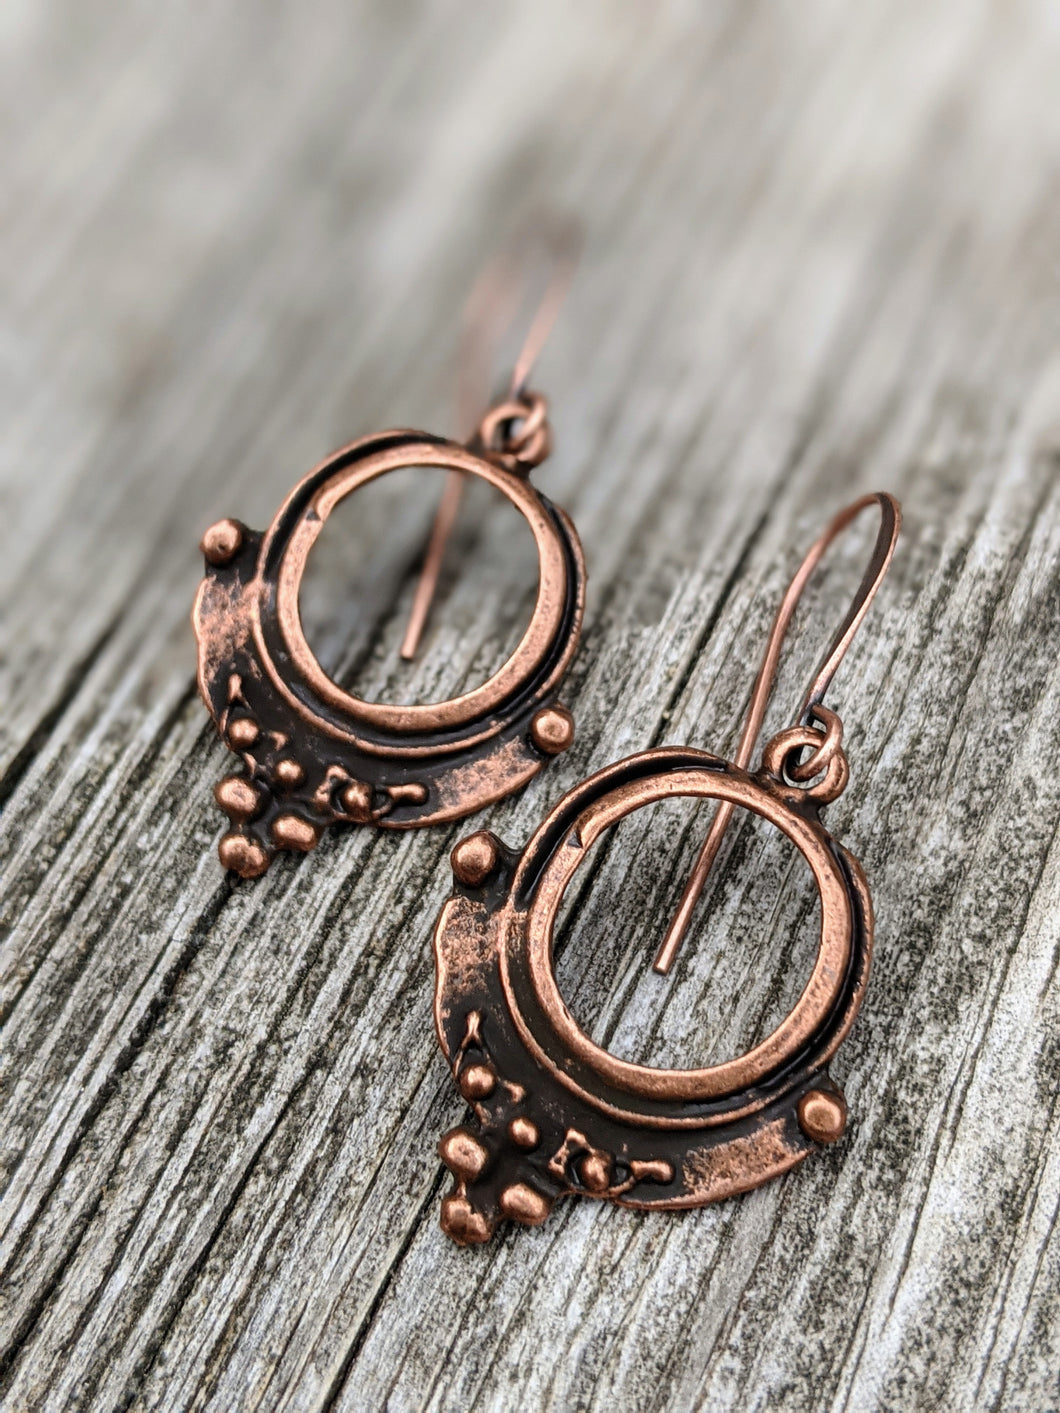 Mini Antiqued Copper Plated Earrings